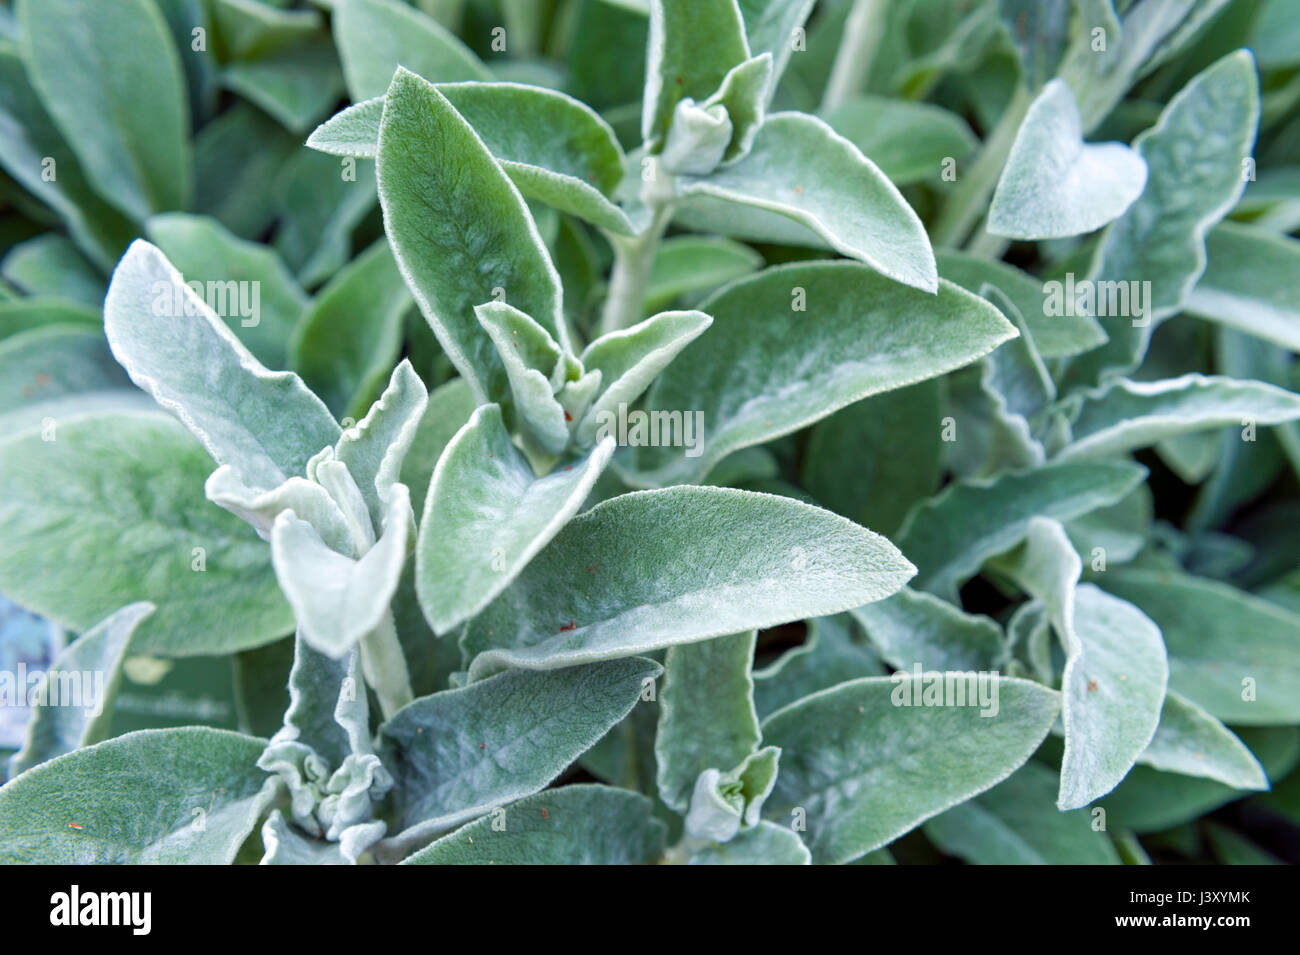 Full frame close-up Stachys byzantina (lamb’s ears or woolly hedgenettle) ornamental plant grow in herbal garden Stock Photo